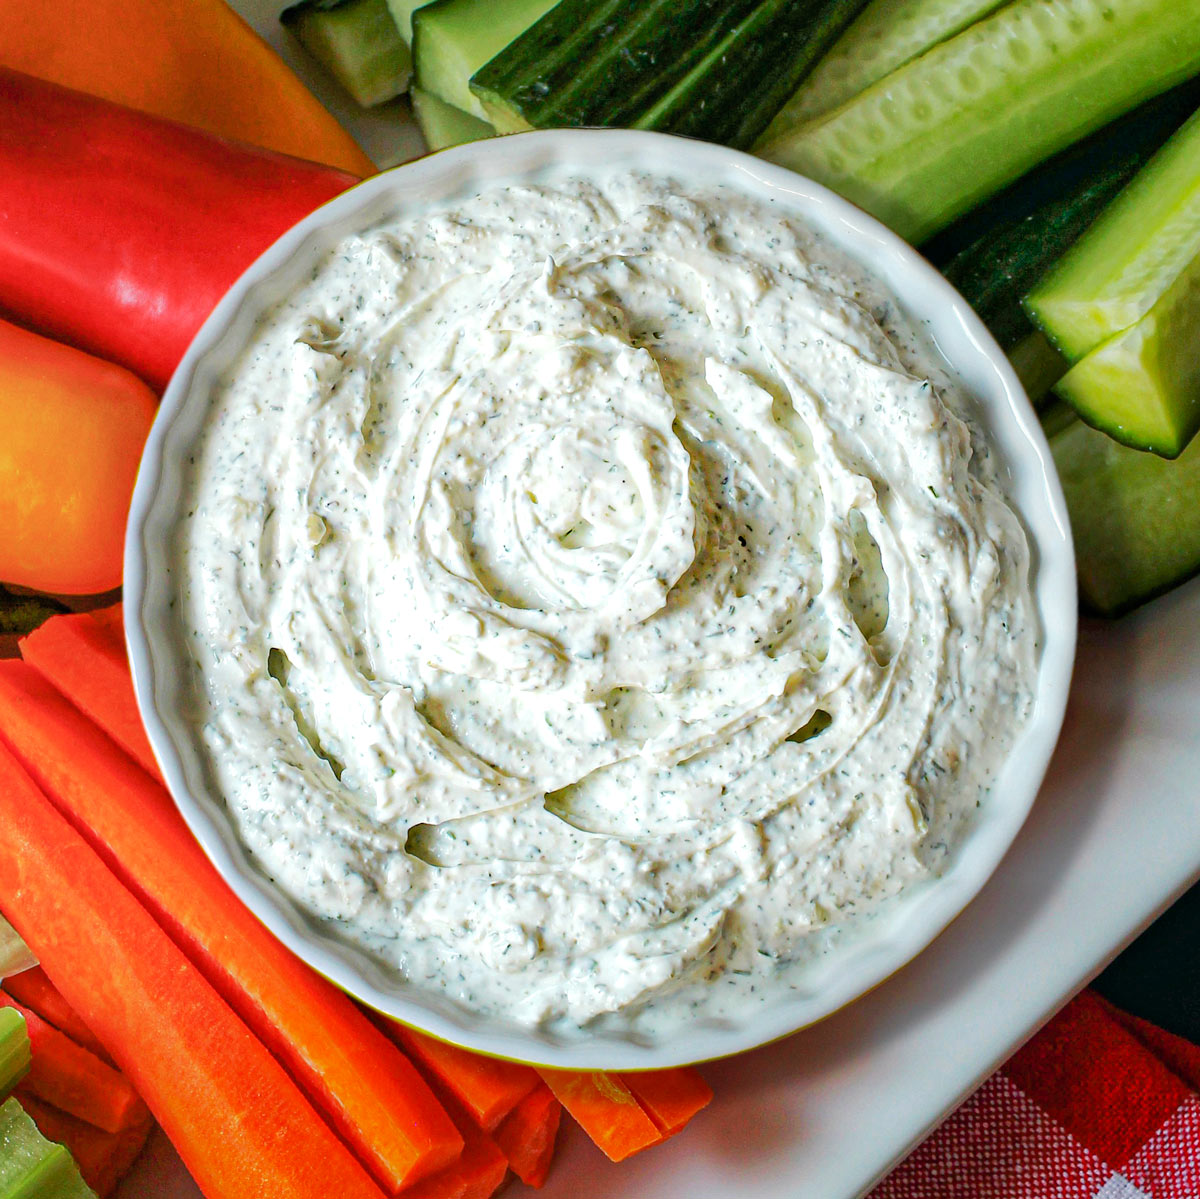 dill dip in small round dish on veggie tray.